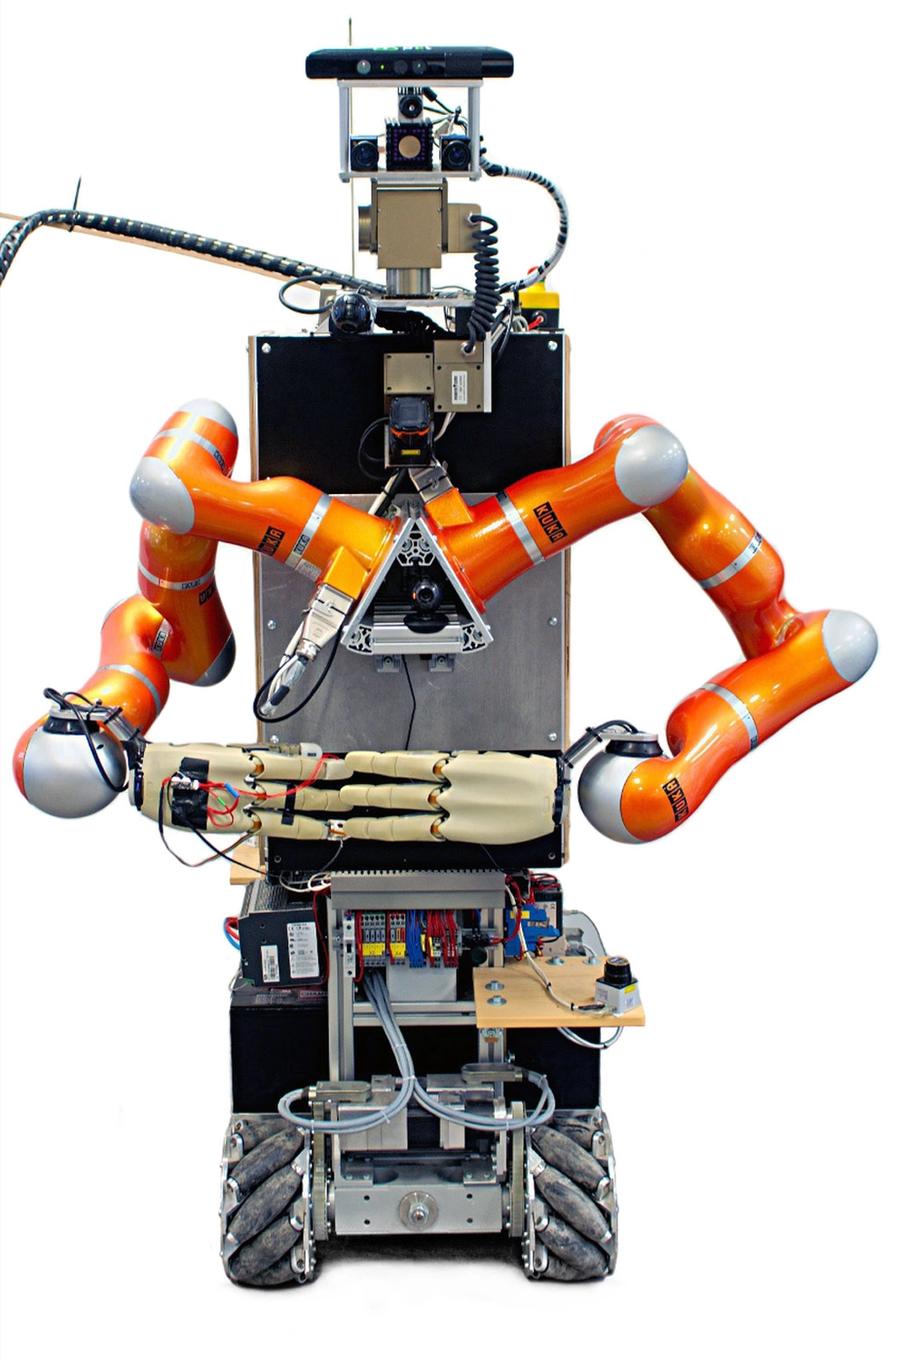 A vertical rectangular box on wheels supports two industrial orange arms and hands with four fingers. The robots head is composed of cameras and a sensor bar.